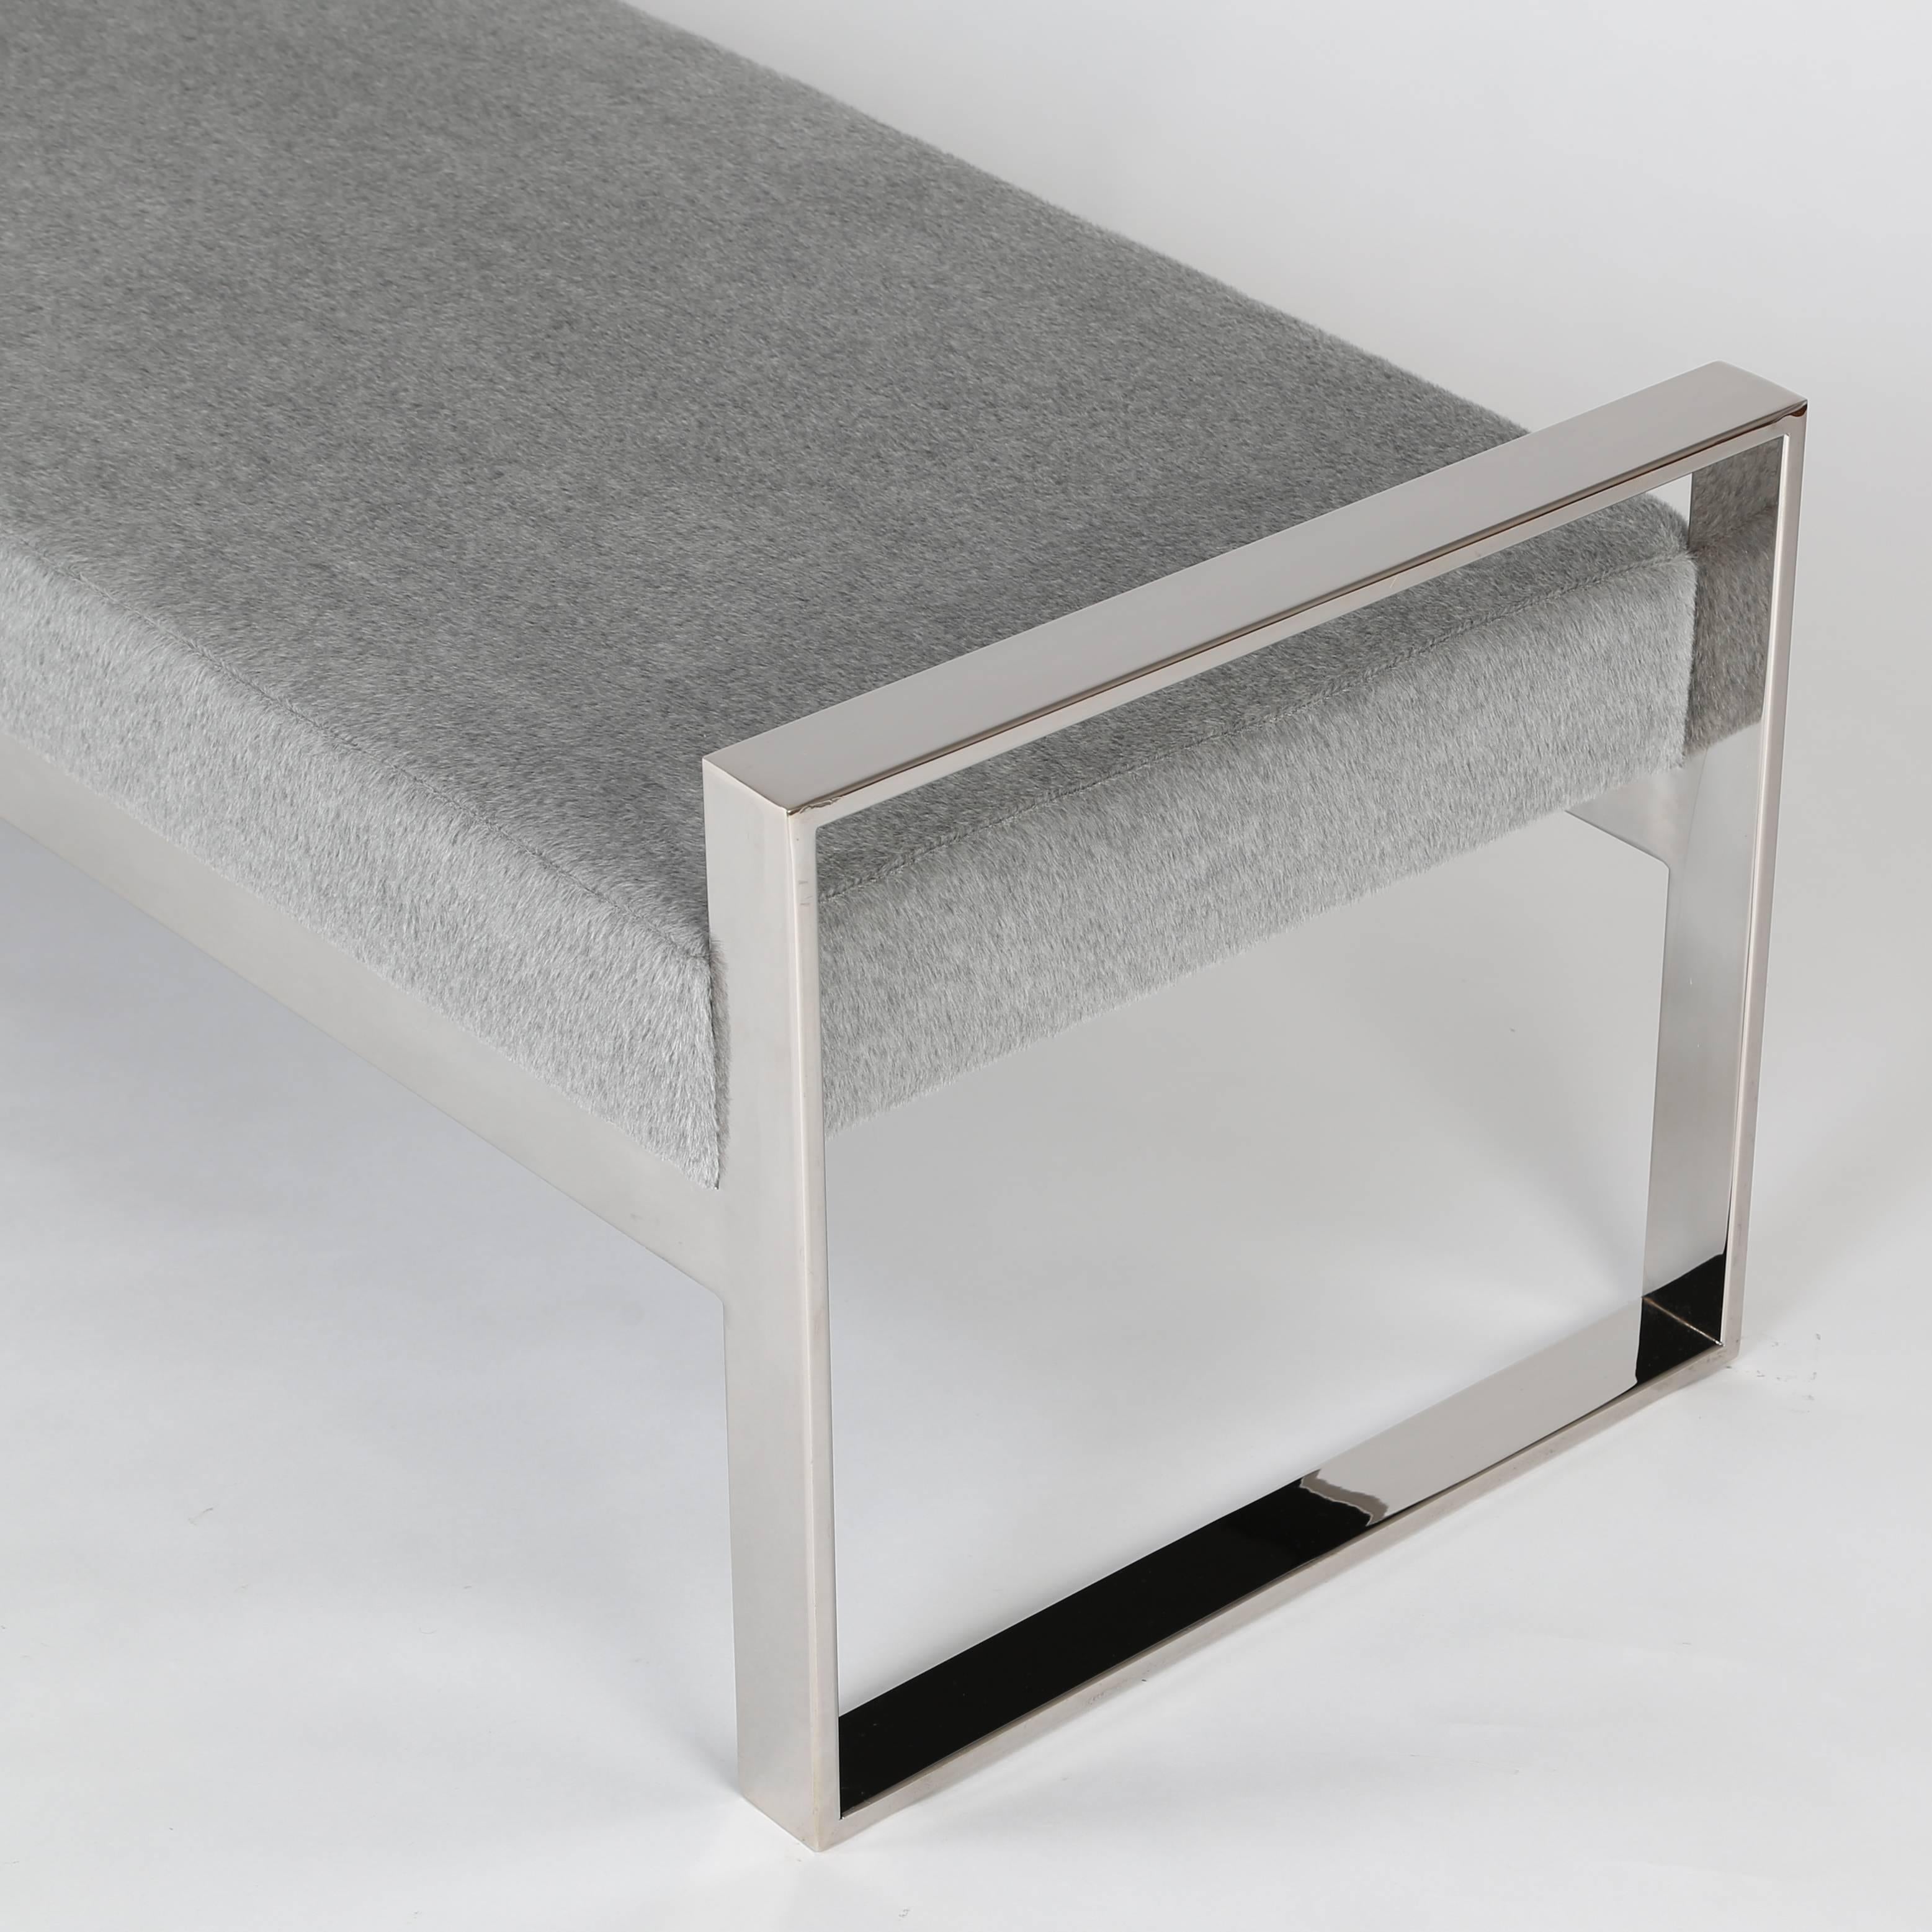 Late 20th Century Chrome-Frame Bench in the Style of Milo Baughman